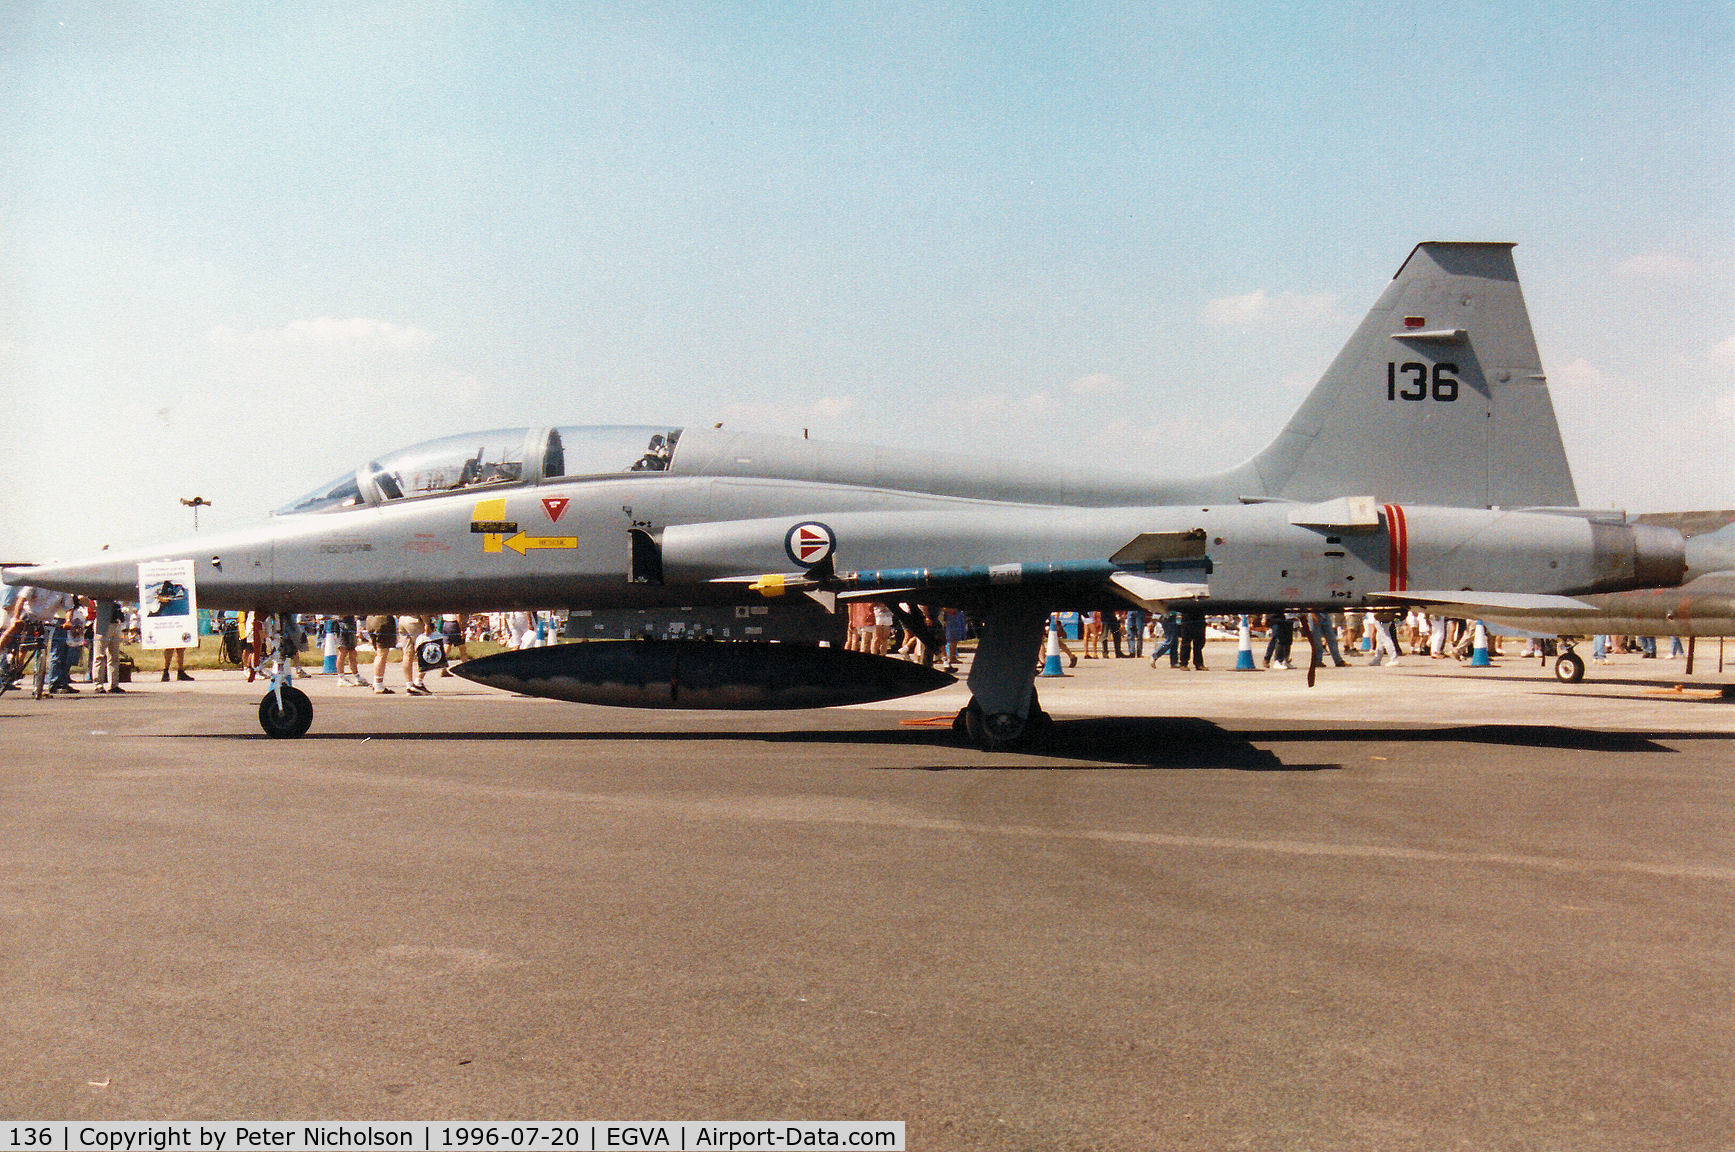 136, 1969 Northrop F-5B Freedom Fighter C/N N.9014, F-5B Freedom Fighter of 336 Skv Royal Norwegian Air Force on display at the 1996 Royal Intnl Air Tattoo at RAF Fairford.